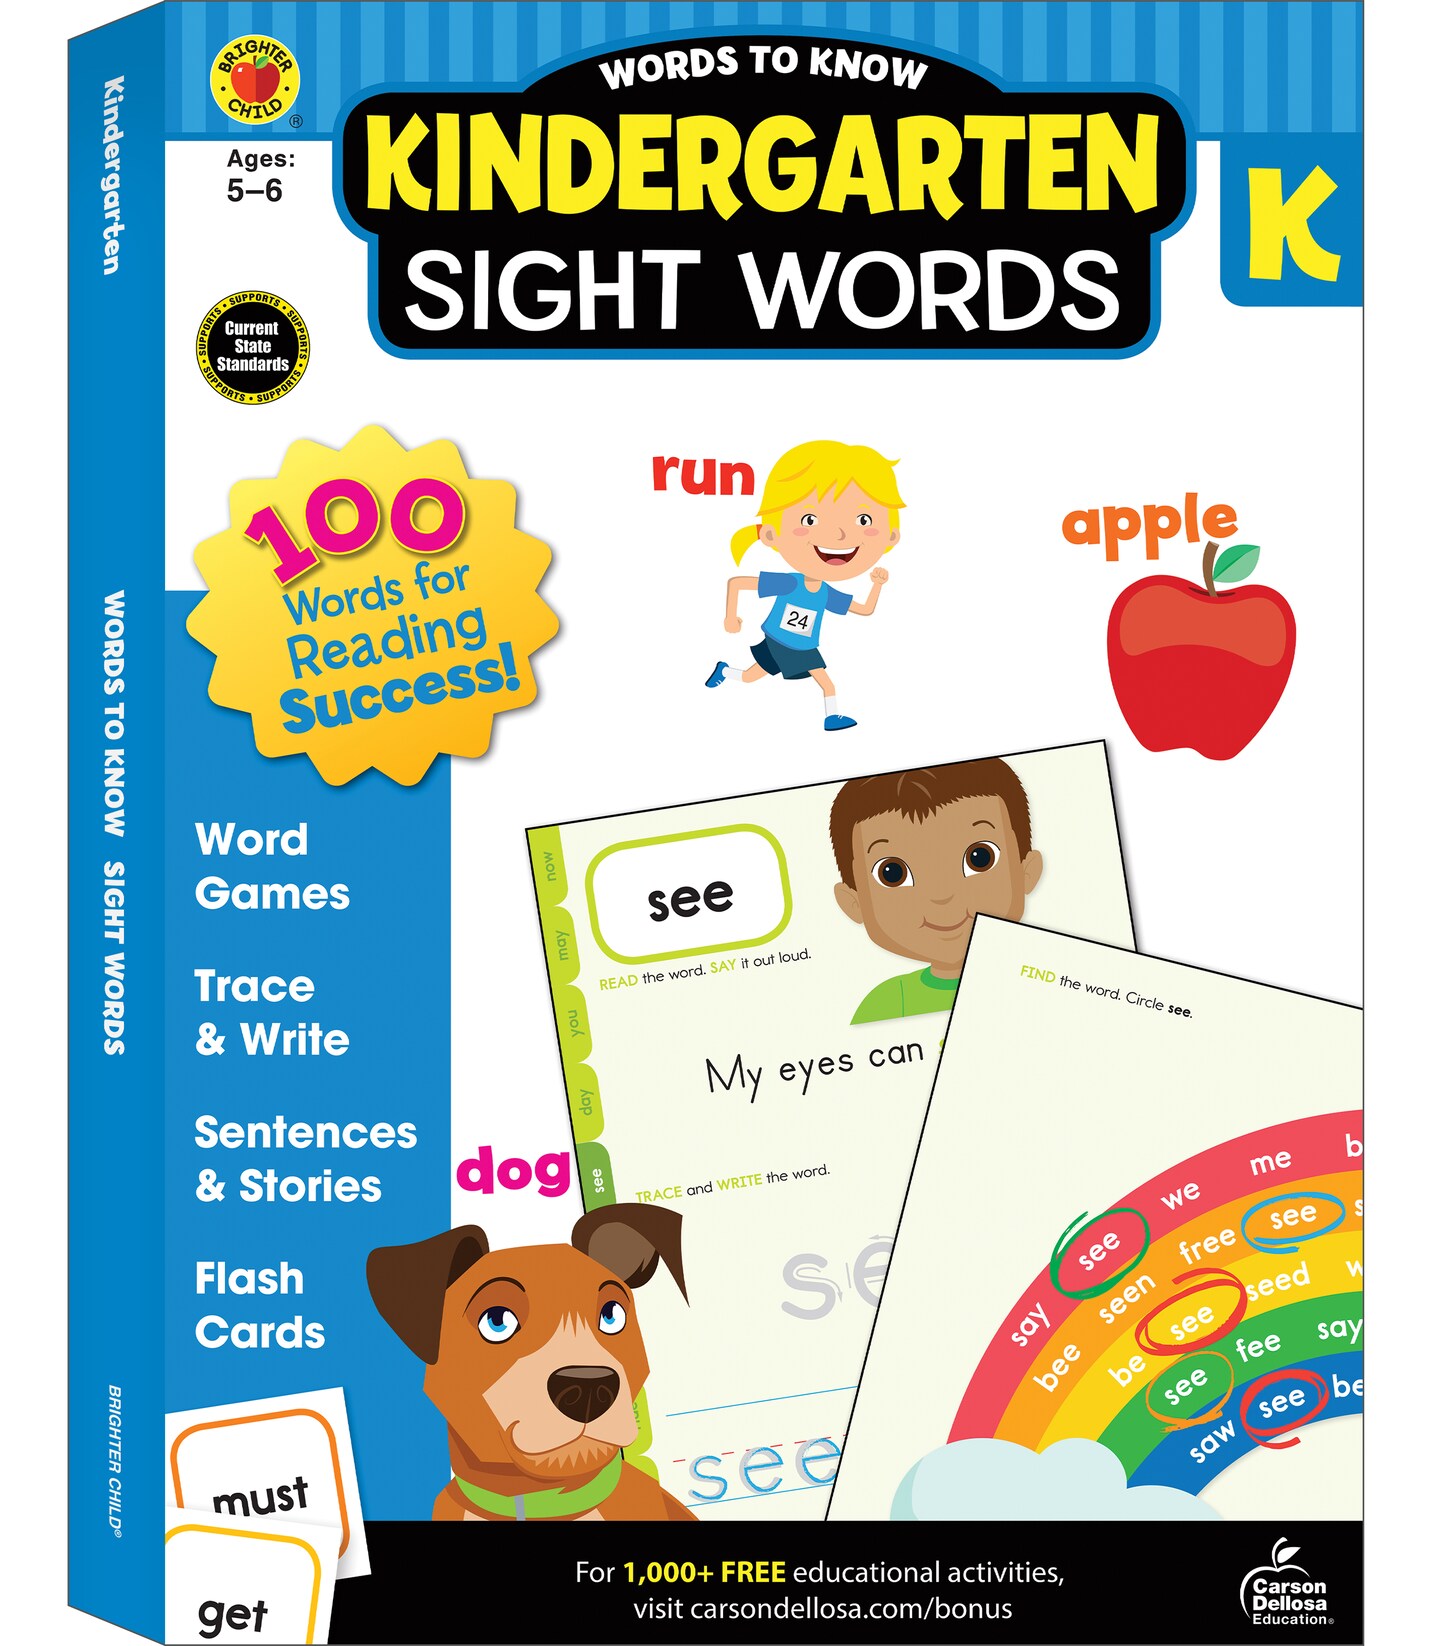 Carson Dellosa Words to Know Sight Words Workbook for Kindergarten&#x2014;Word Search, Games, Puzzles, Flashcards, Handwriting, Coloring for Learning and Reading Practice (320 pgs)